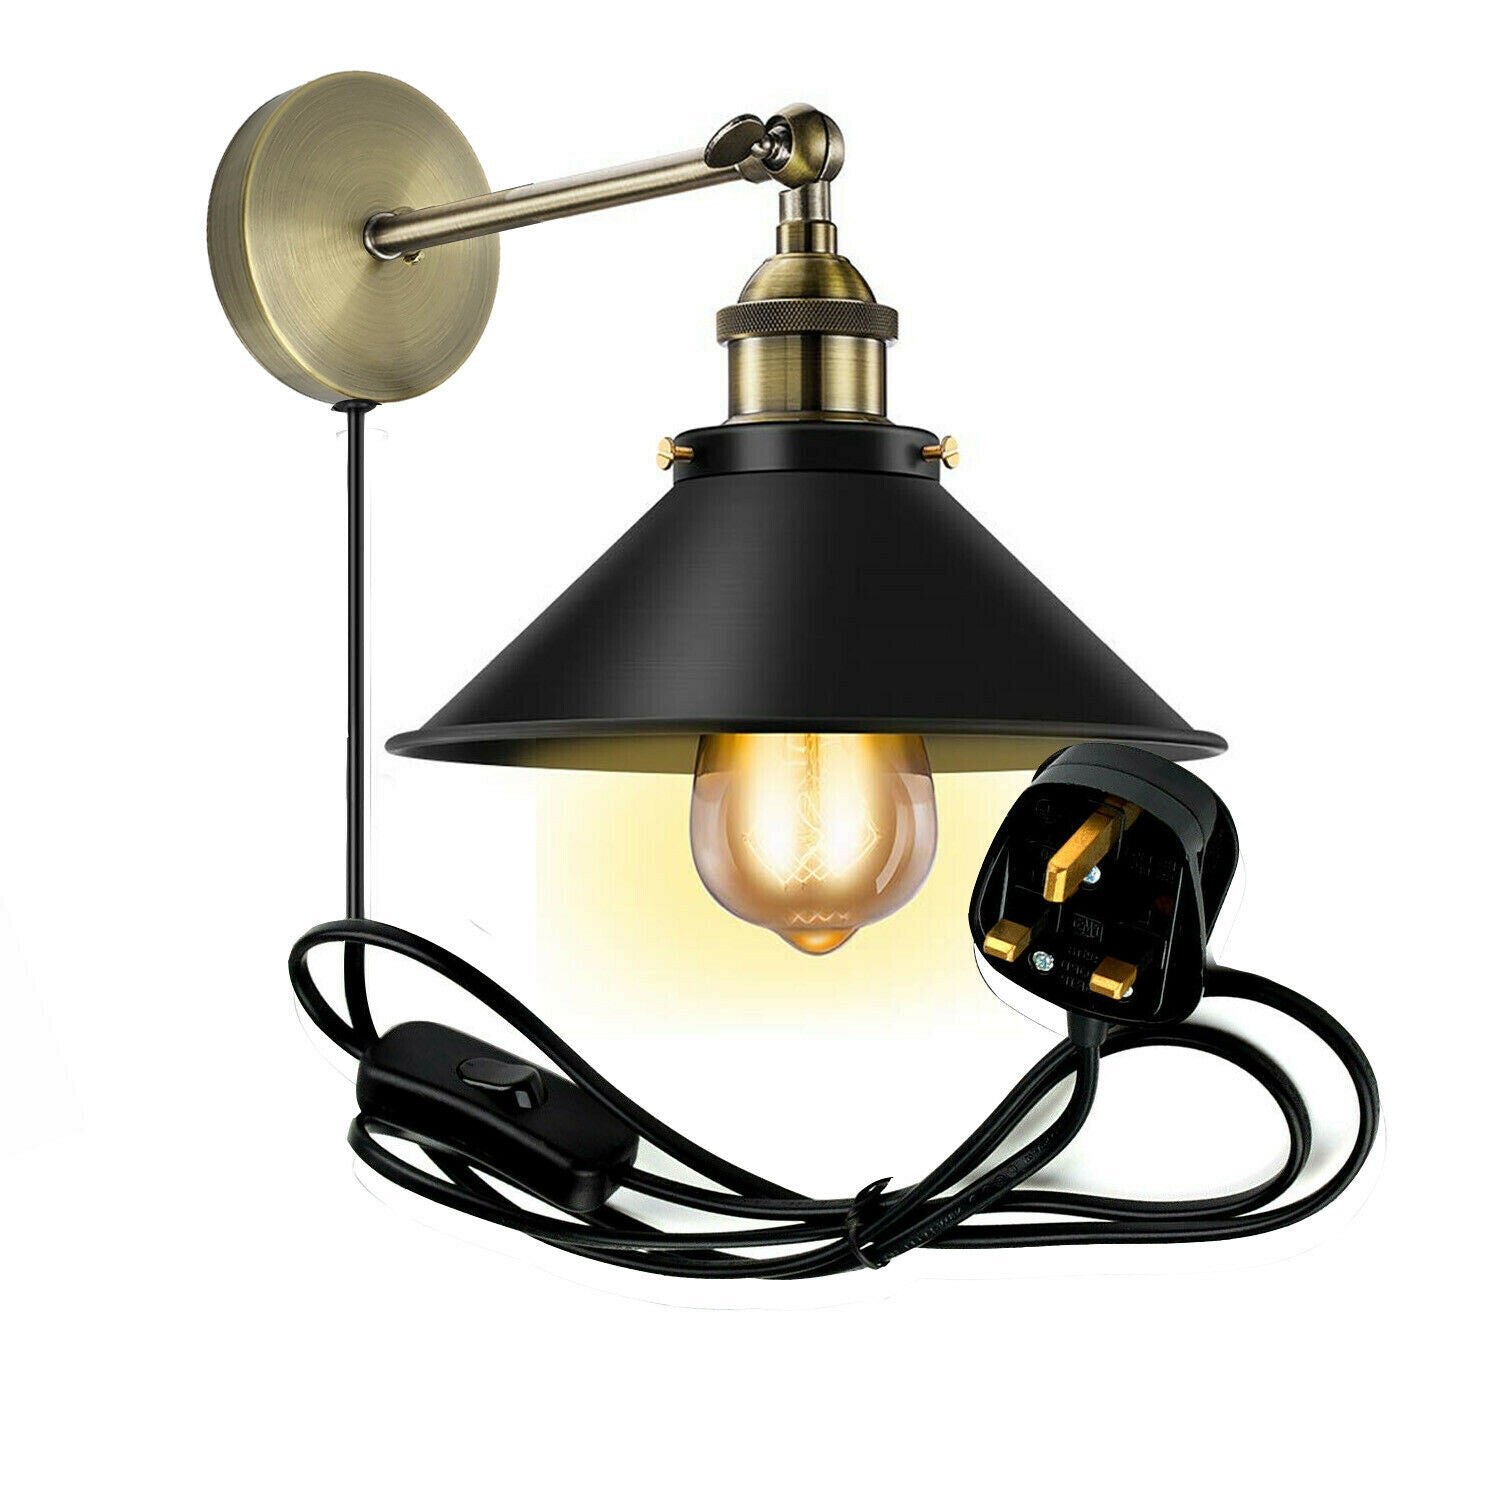 Vintage Retro Modern Plug In Wall Light Fitting Black Sconce with FREE Bulb